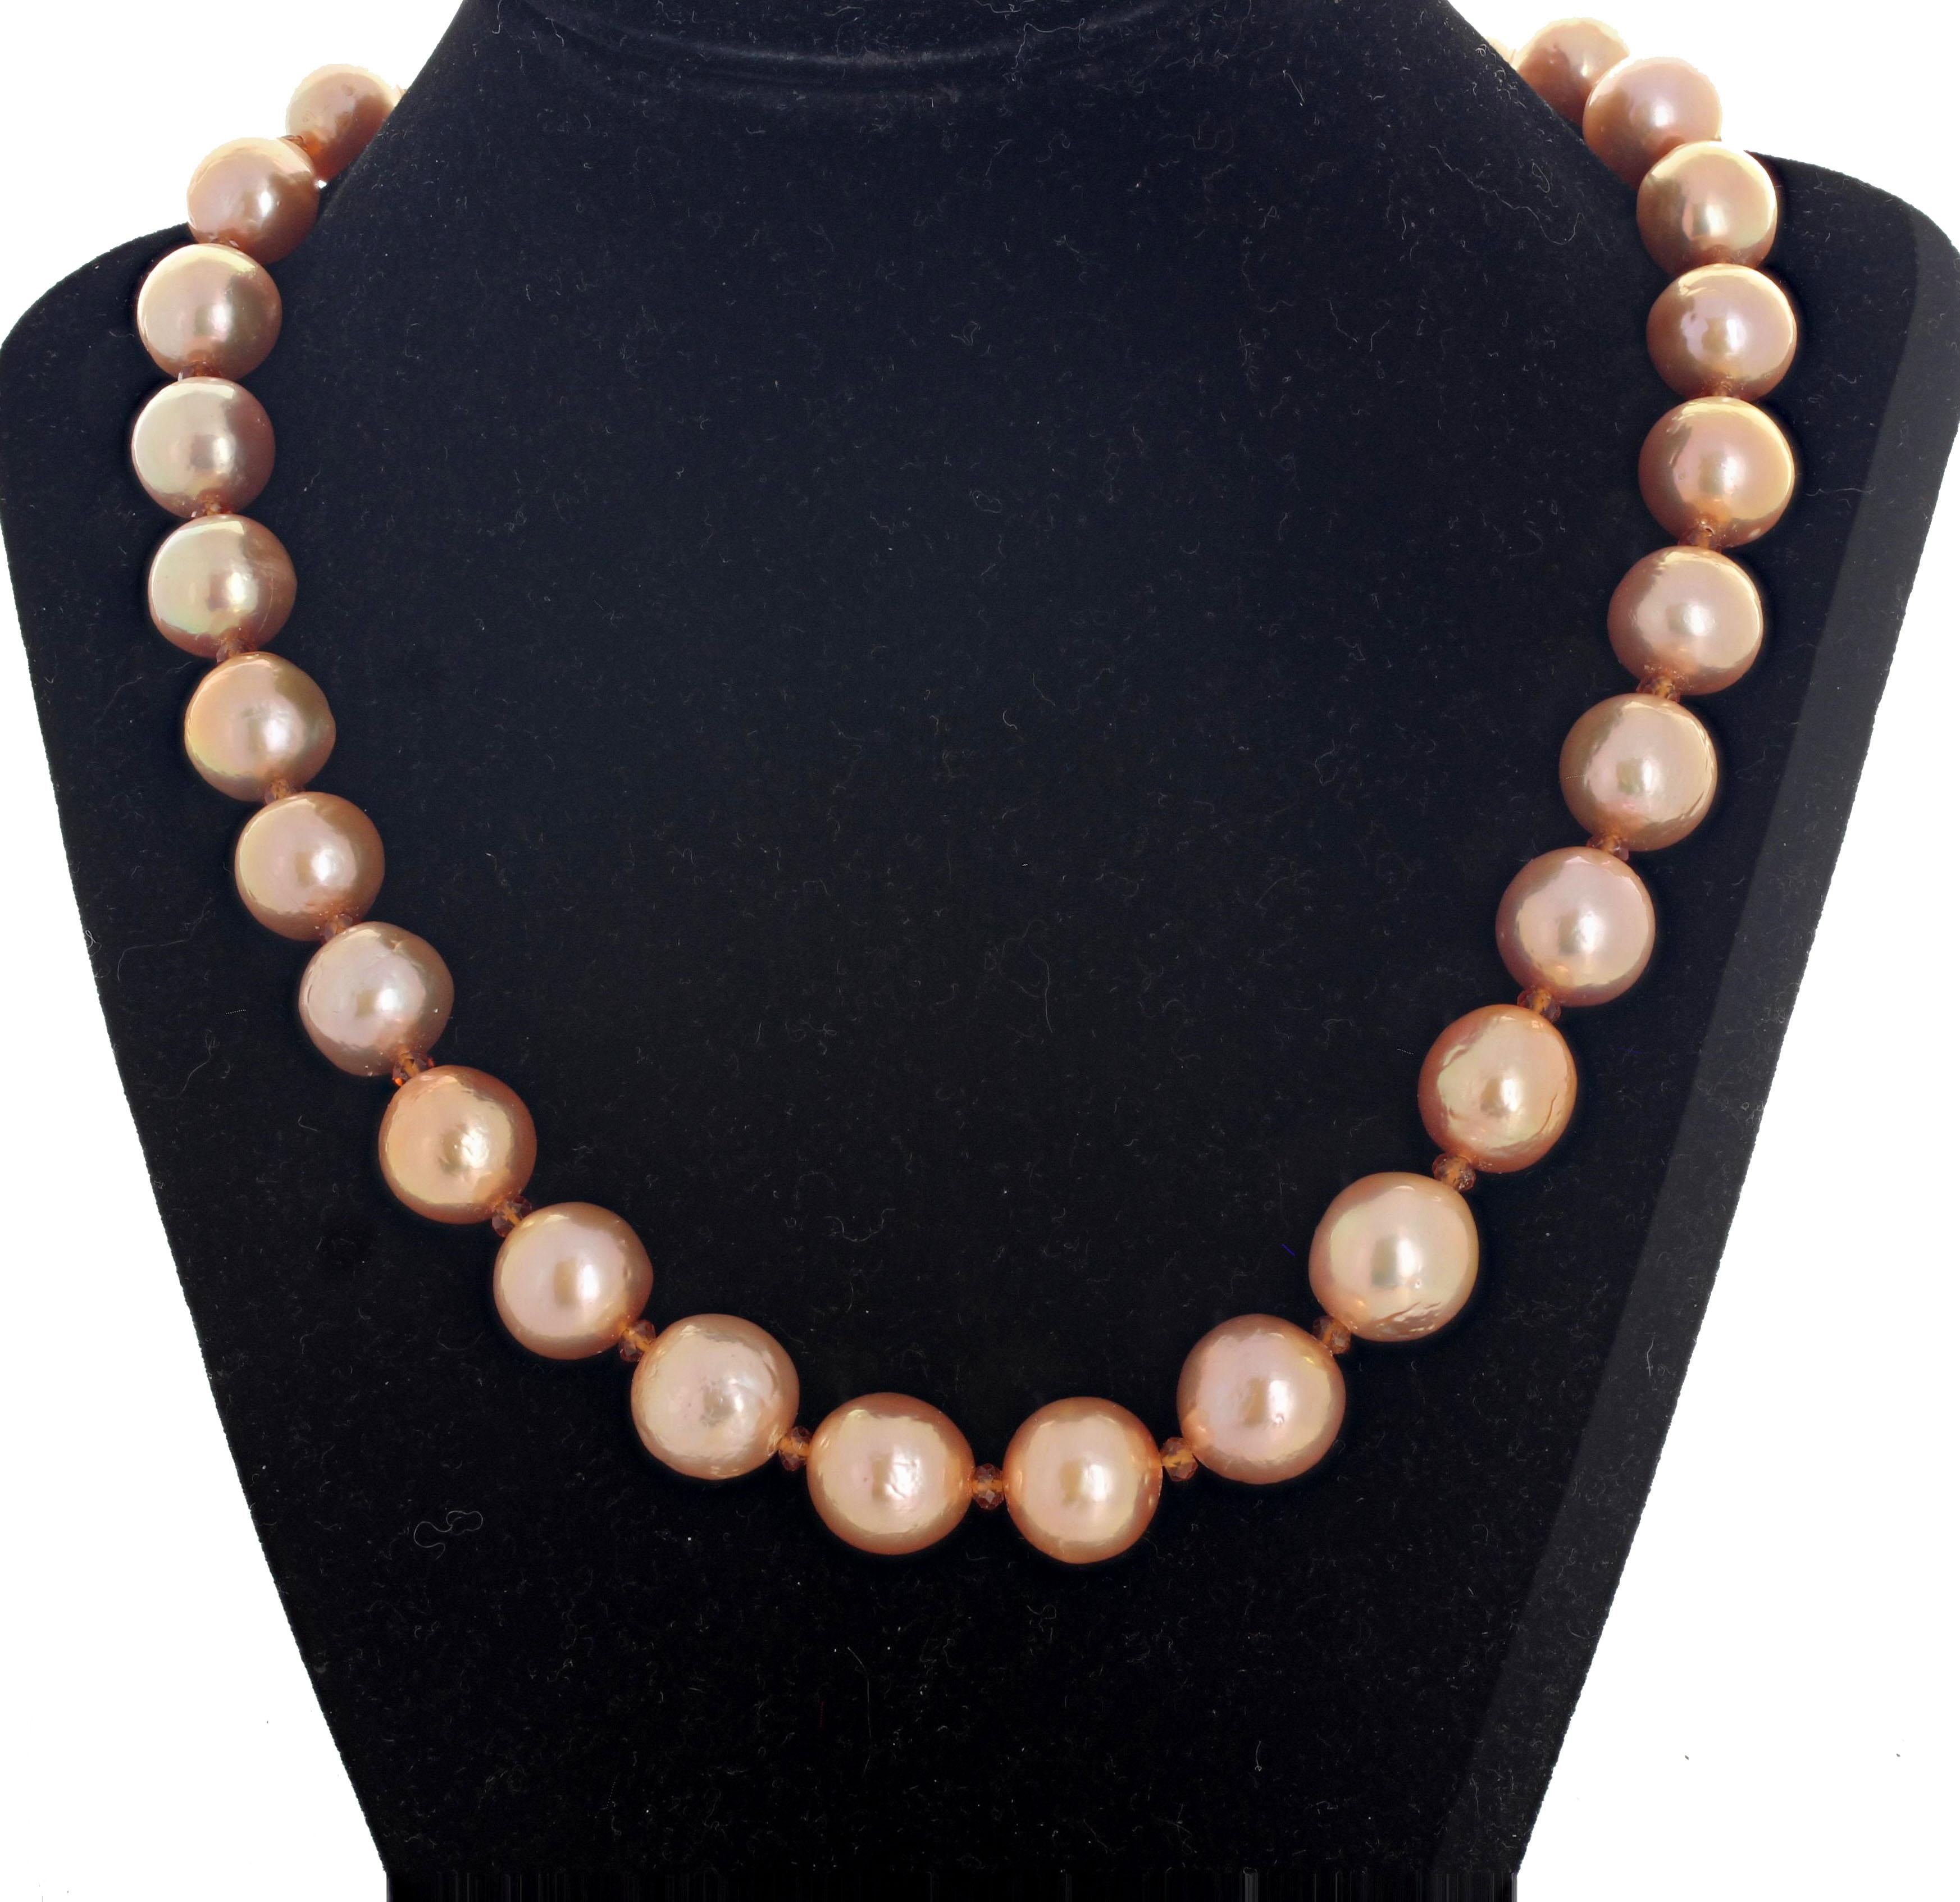 Women's or Men's AJD RARE Peachy Glowing Ocean NATURAL Pearls Necklace & Matching Earrings Set For Sale